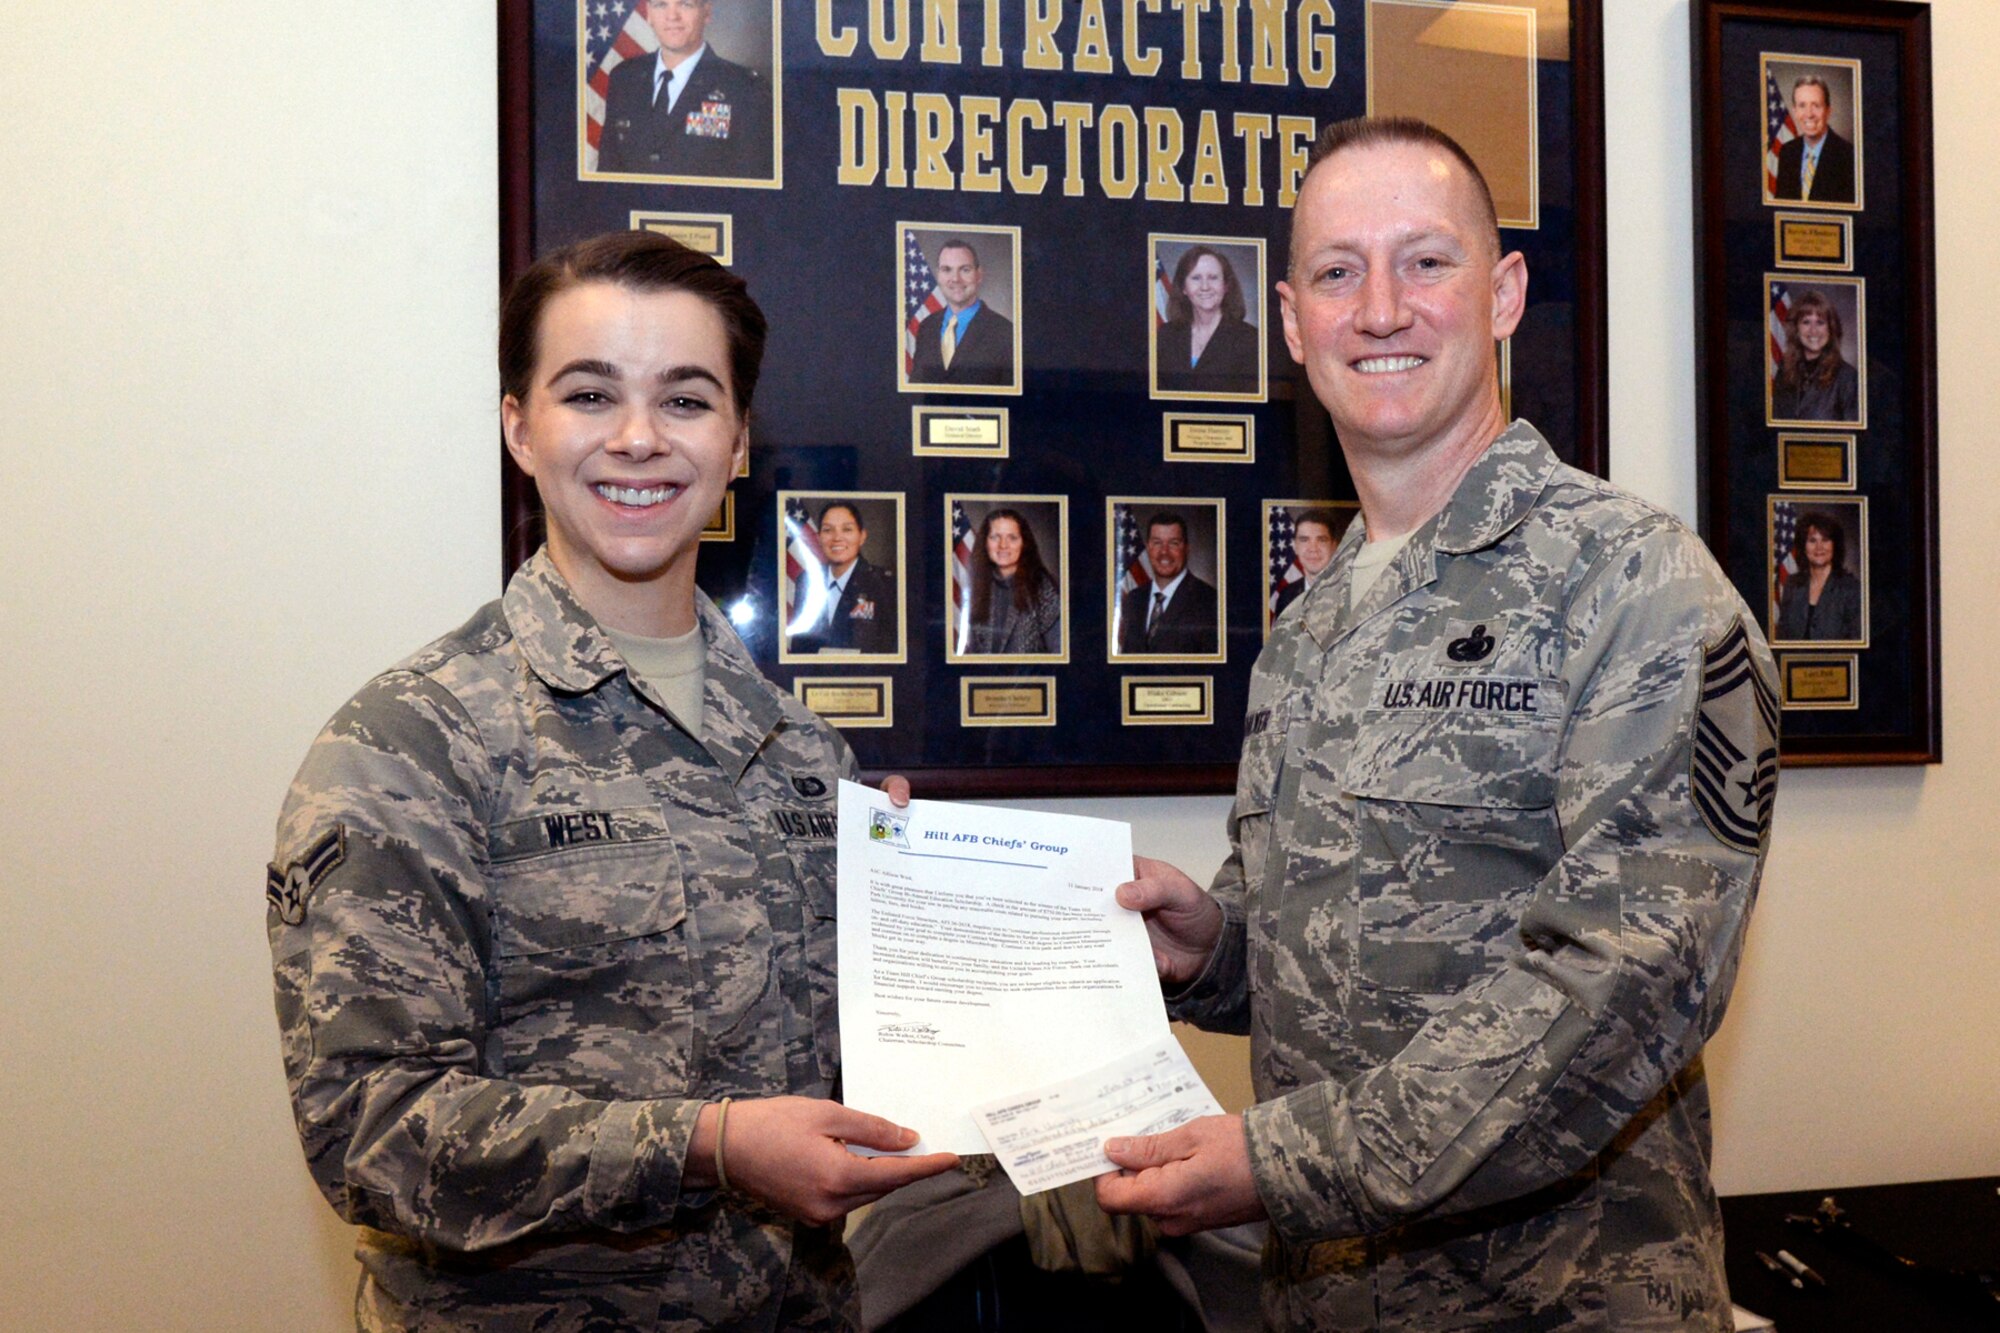 Airman 1st Class Allison West, Contracting Directorate, receives a $750 scholarship from Chief Master Sgt. Rulon Walker, representing the Chiefs' Group, at Hill Air Force Base, Utah, Feb. 15, 2018. (U.S. Air Force photo by Todd Cromar)